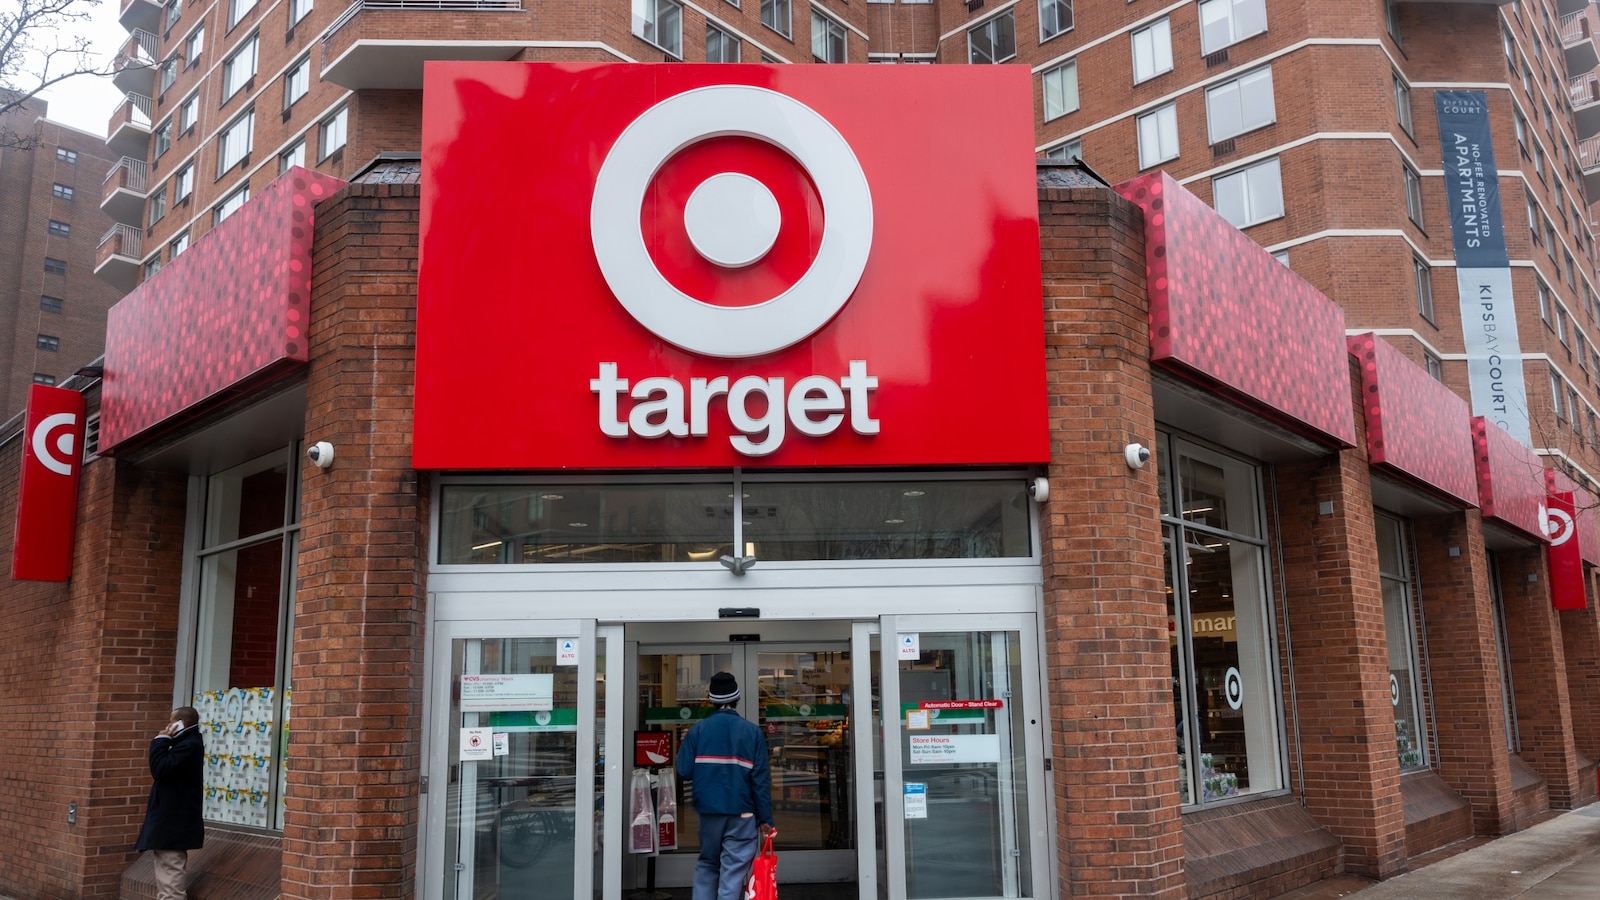 Target cutting prices on thousands of basic items: Here's which items will cost less